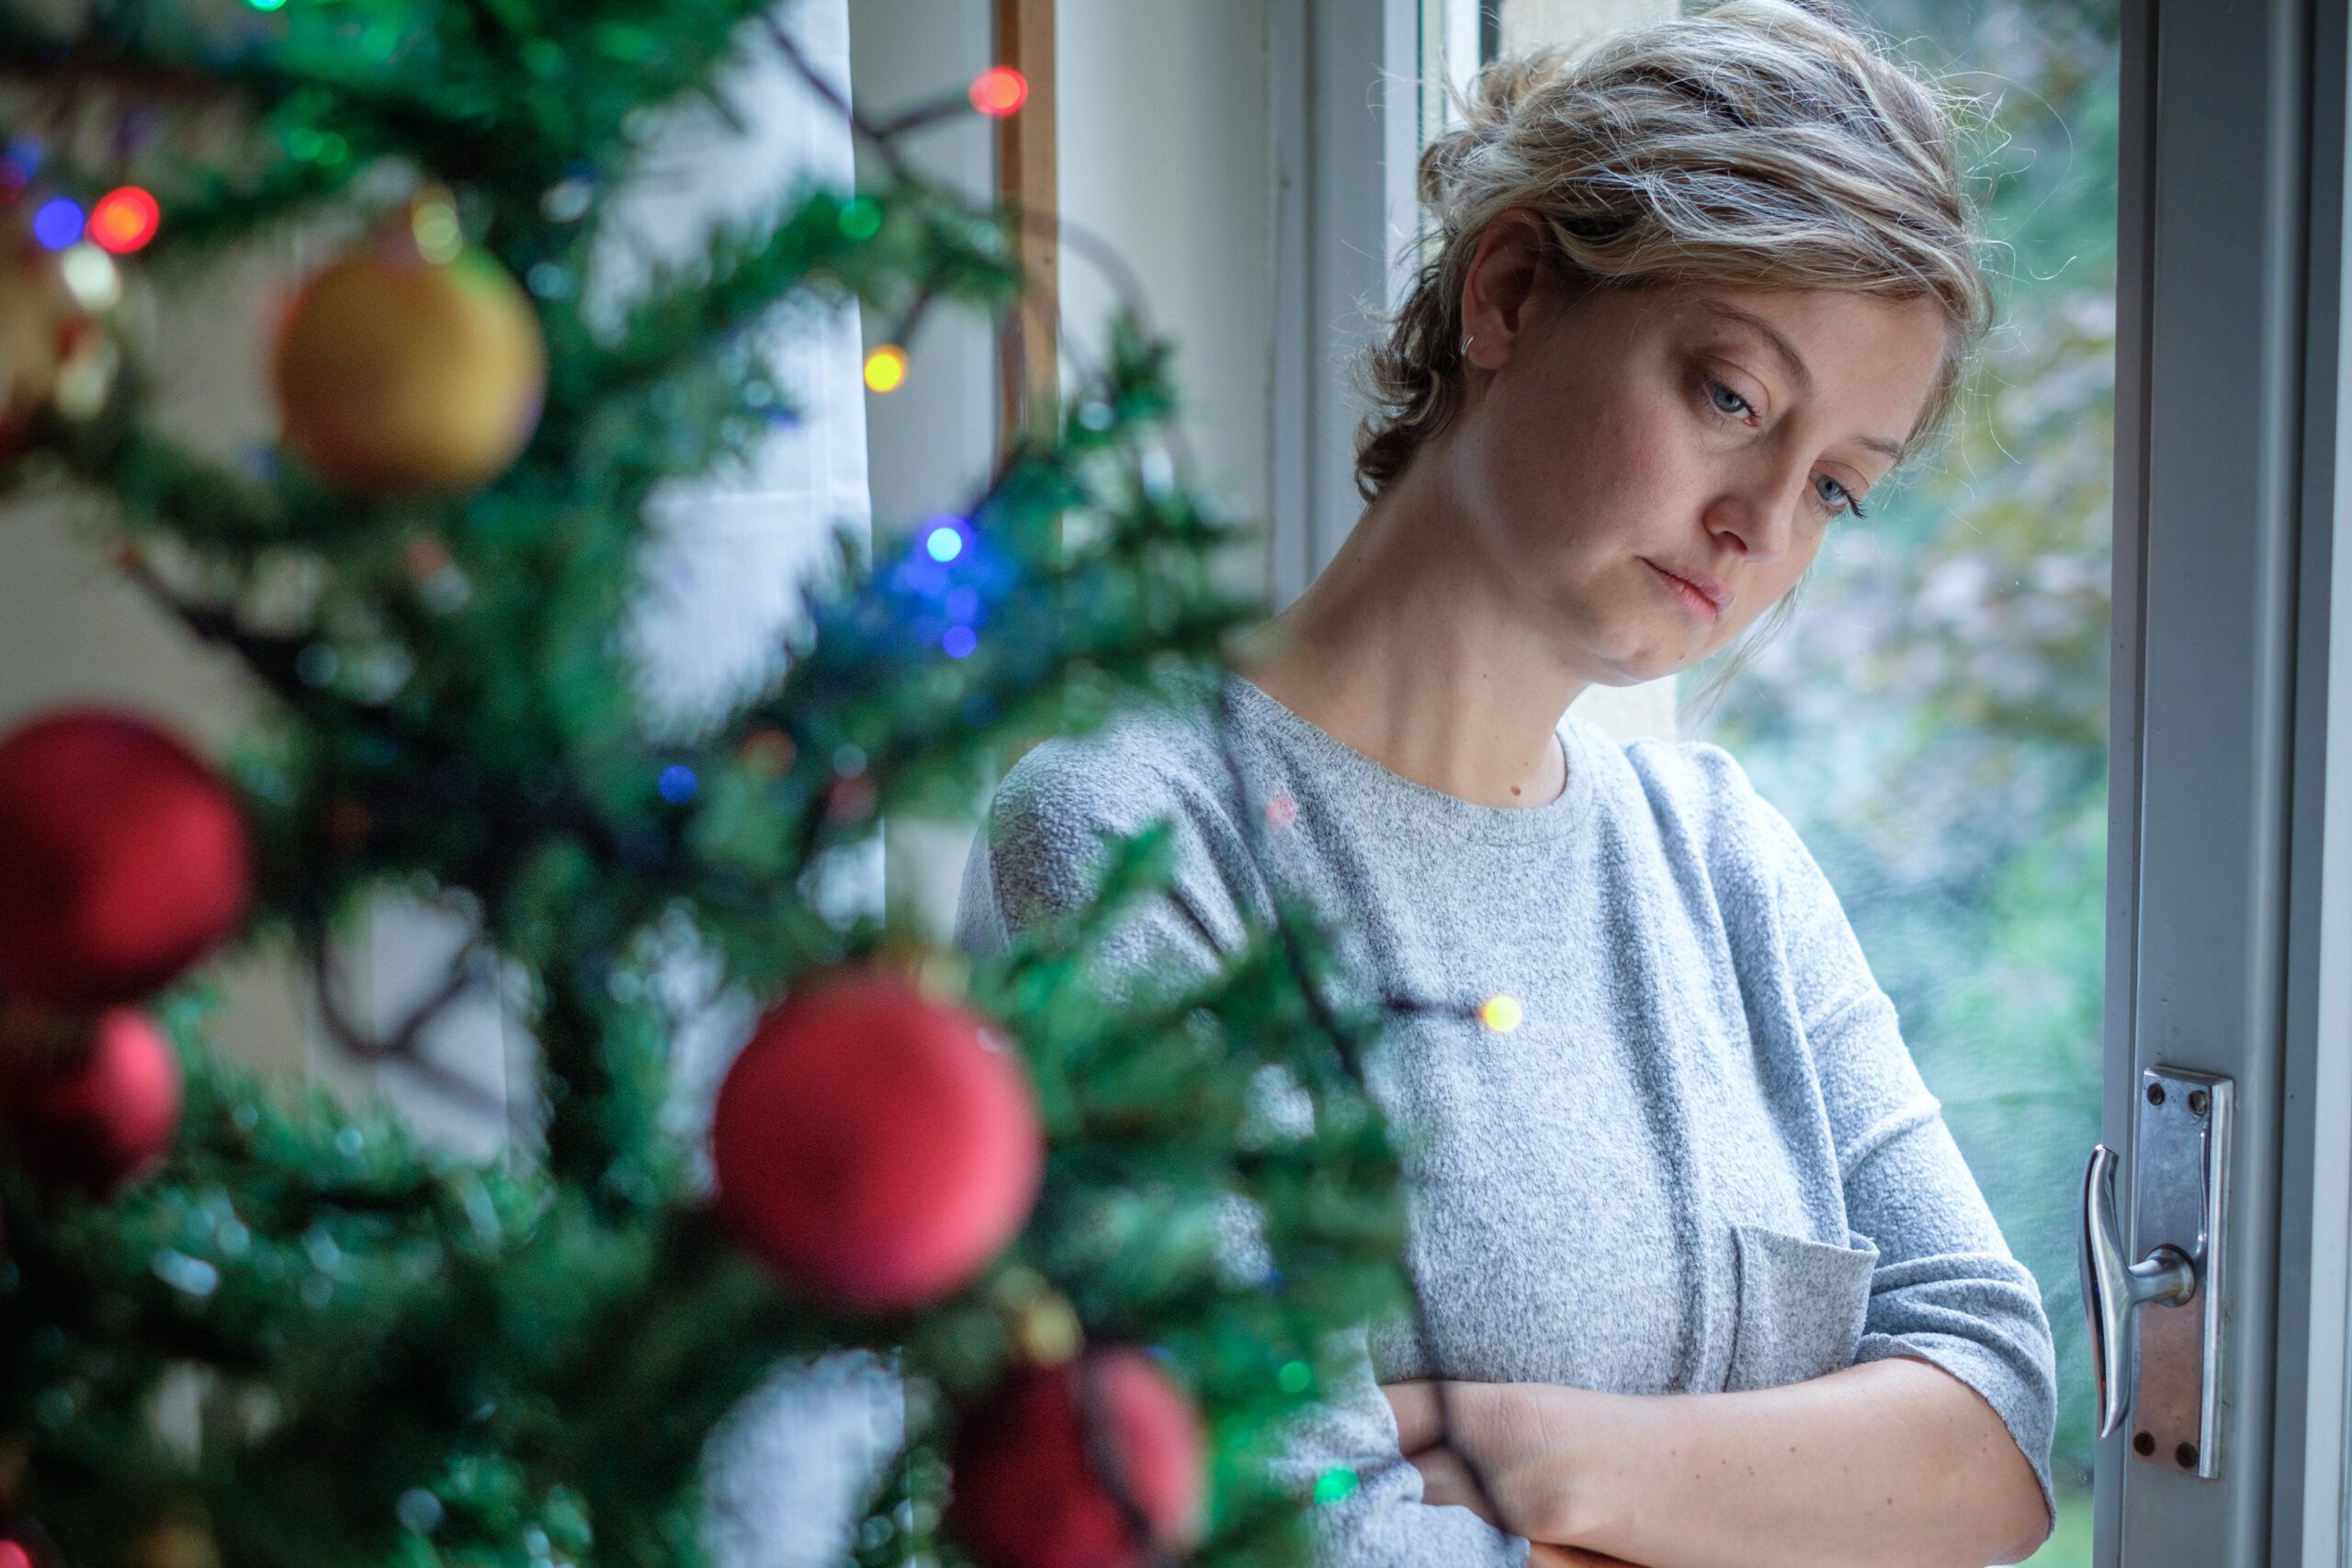 Woman going through a divorce during the holidays sad by a Christmas tree